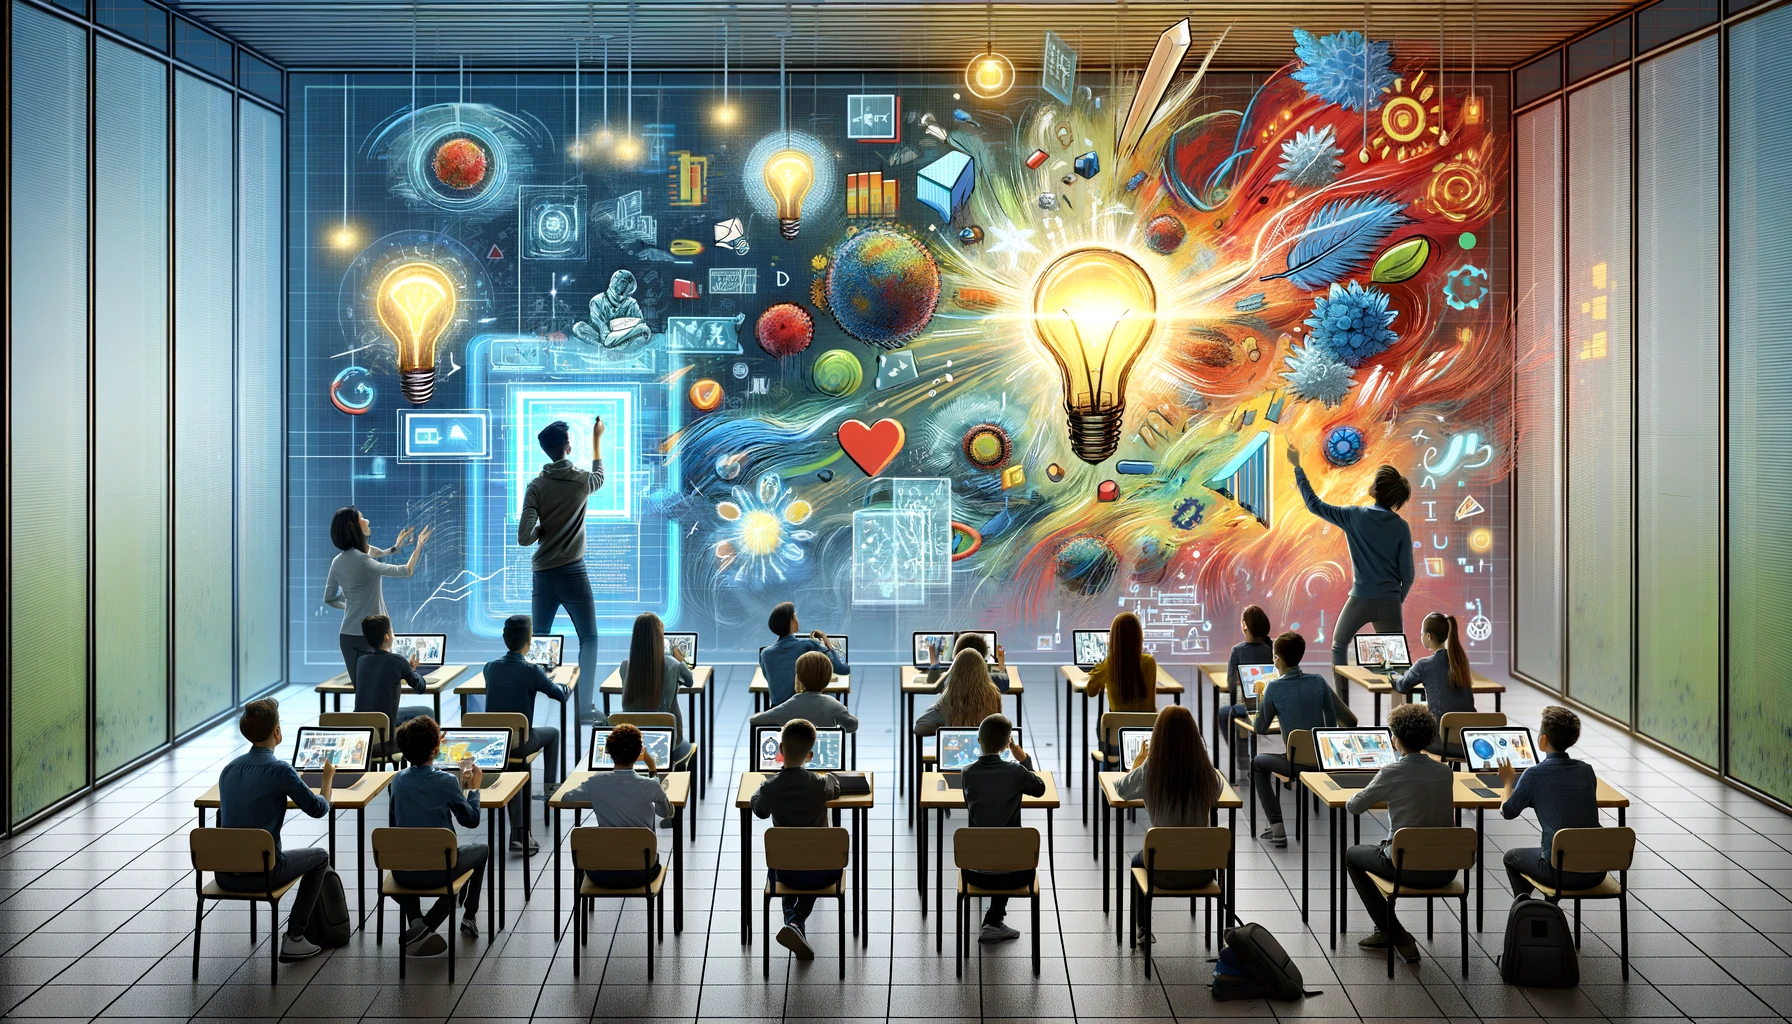 This image brings to life a classroom where technology and human interaction are seamlessly integrated. Interactive walls respond to students' inputs in real-time, with the teacher facilitating a dynamic learning experience. The vibrant colors against the sophisticated grays highlight the sparks of insight and creativity flowing through the room.